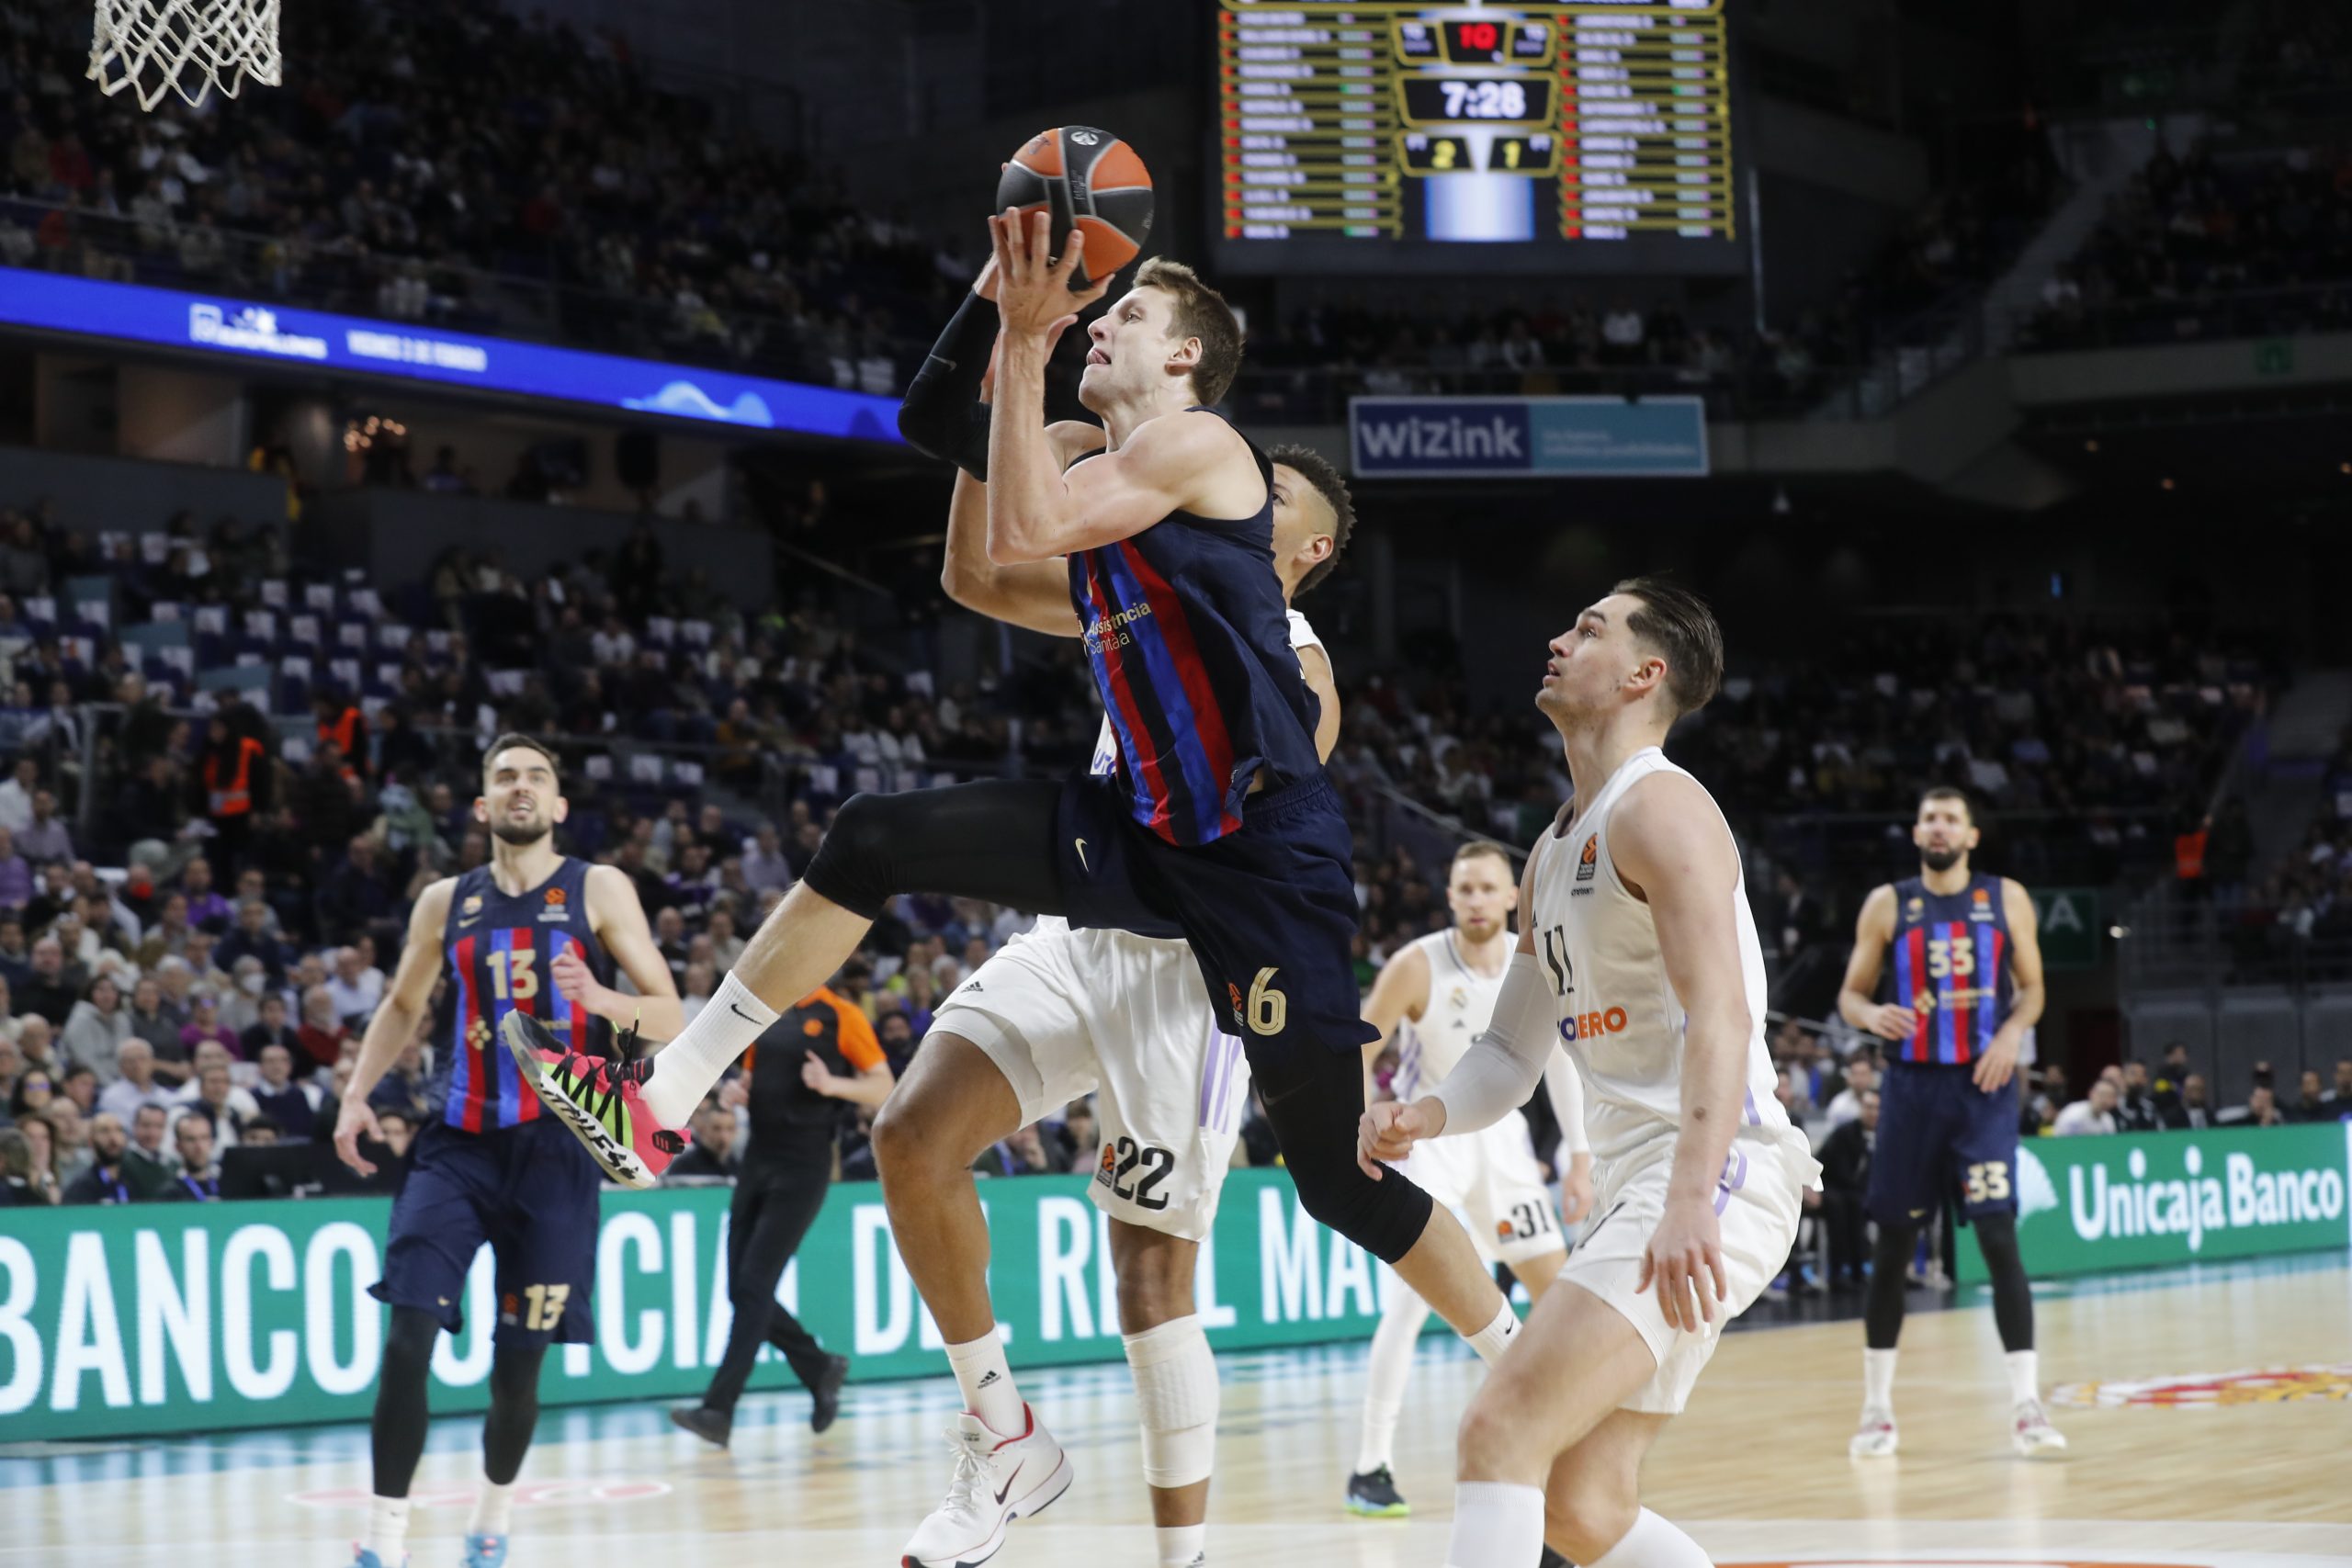 epa10431607 Barcelona's Jan Vesely (C) in action against Real Madrid's Mario Hezonja (R) during the Euroleague basketball match between Real Madrid and FC Barcelona, in Madrid, central Spain, 26 January 2023.  EPA/Juan Carlos Hidalgo